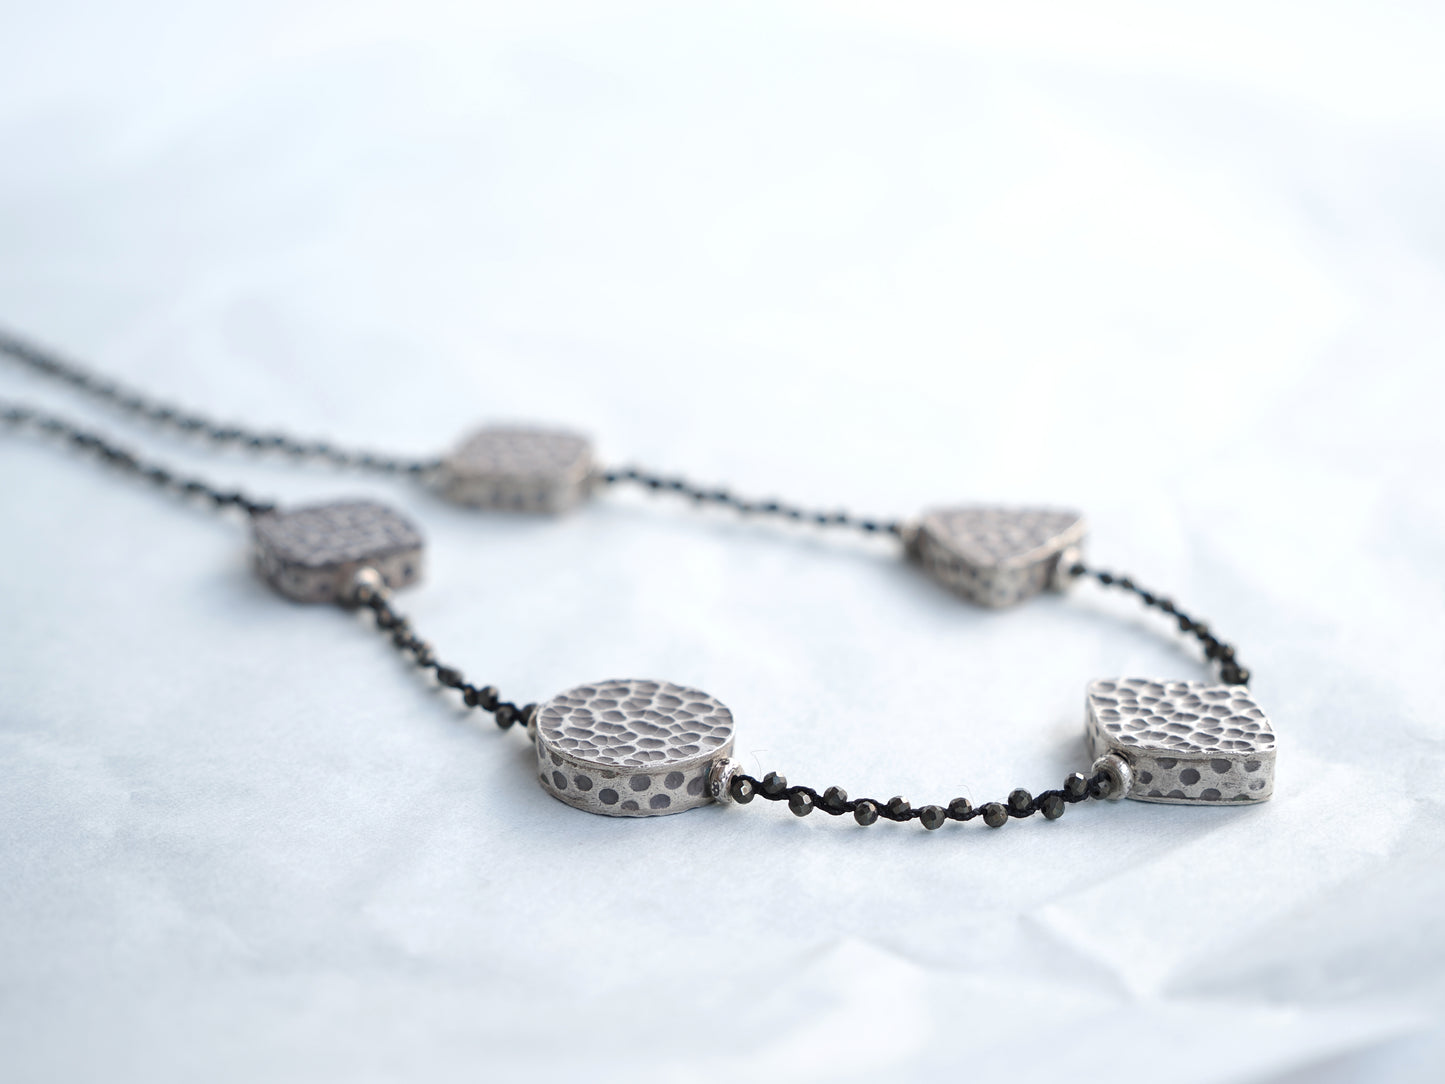 Braid necklace -Hammered silver-